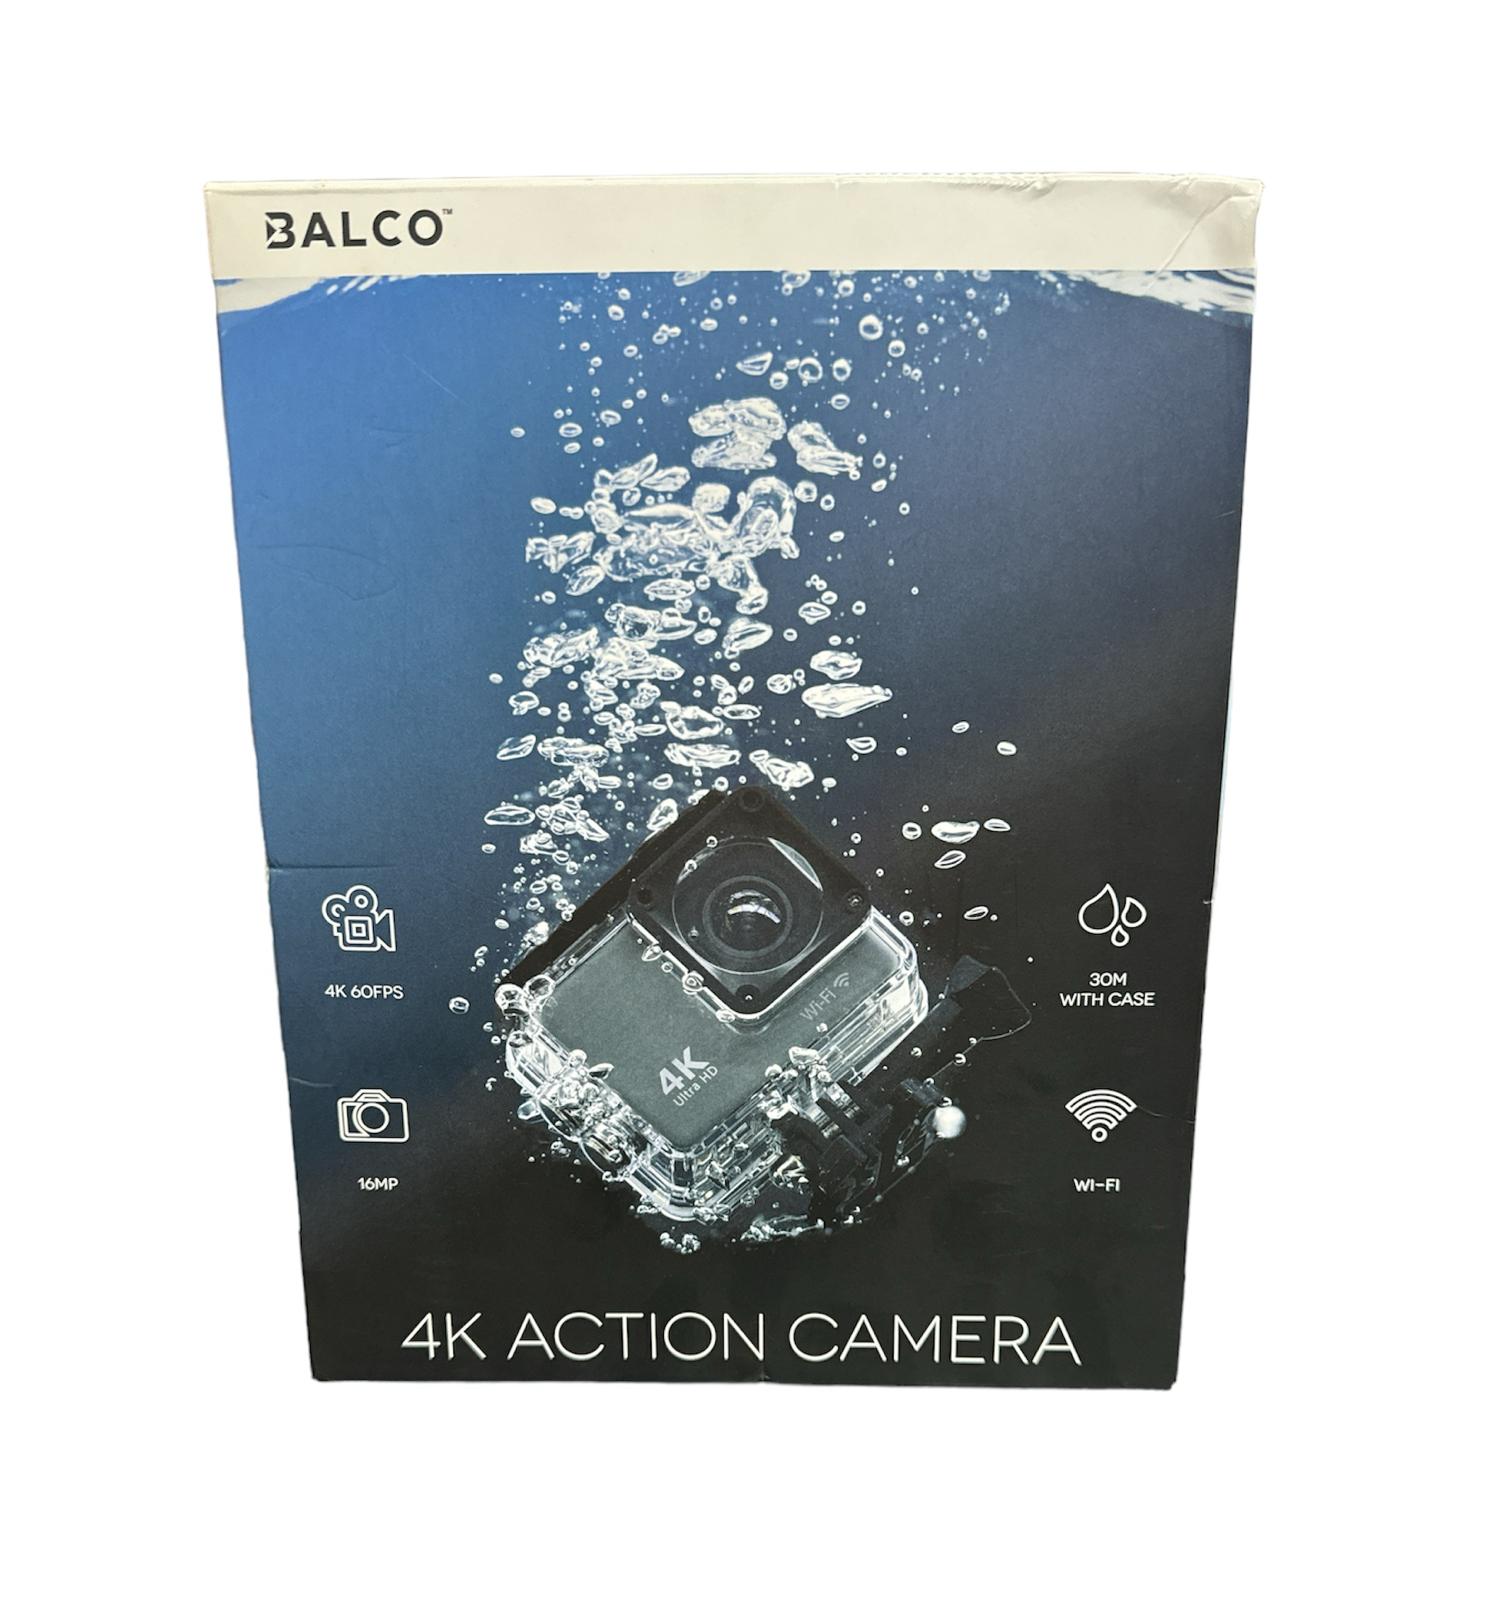 Balco 4K Action Camera Opened Never Used